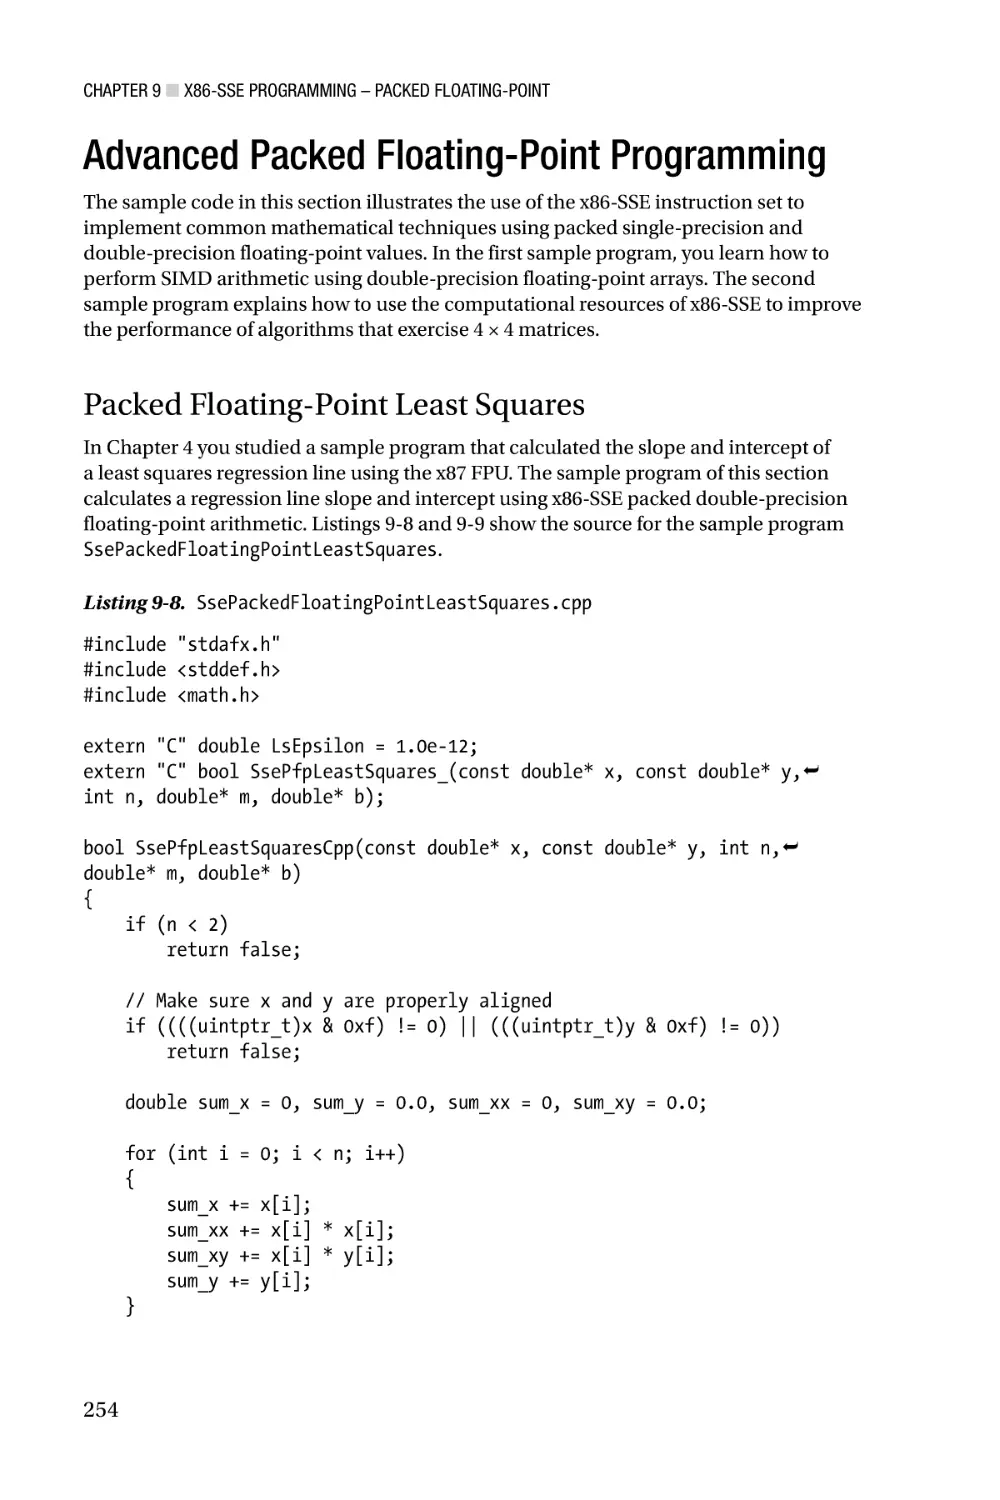 Advanced Packed Floating-Point Programming
Packed Floating-Point Least Squares